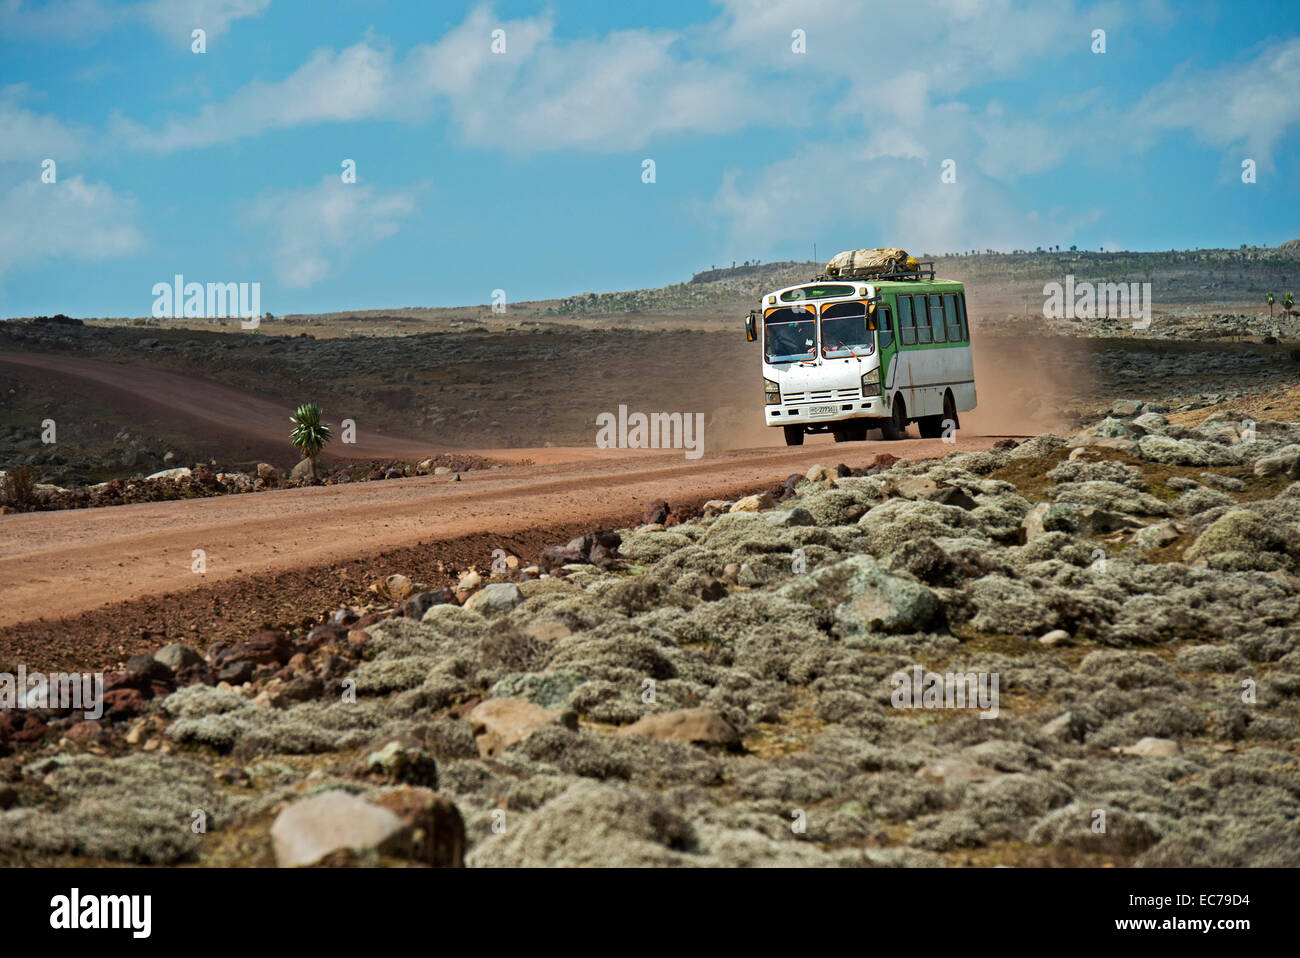 Local bus on highest all-weather road in Africa on the Sanetti Plateau at at about 4000m above sea level, Bale Mountains, Ethiopia Stock Photo